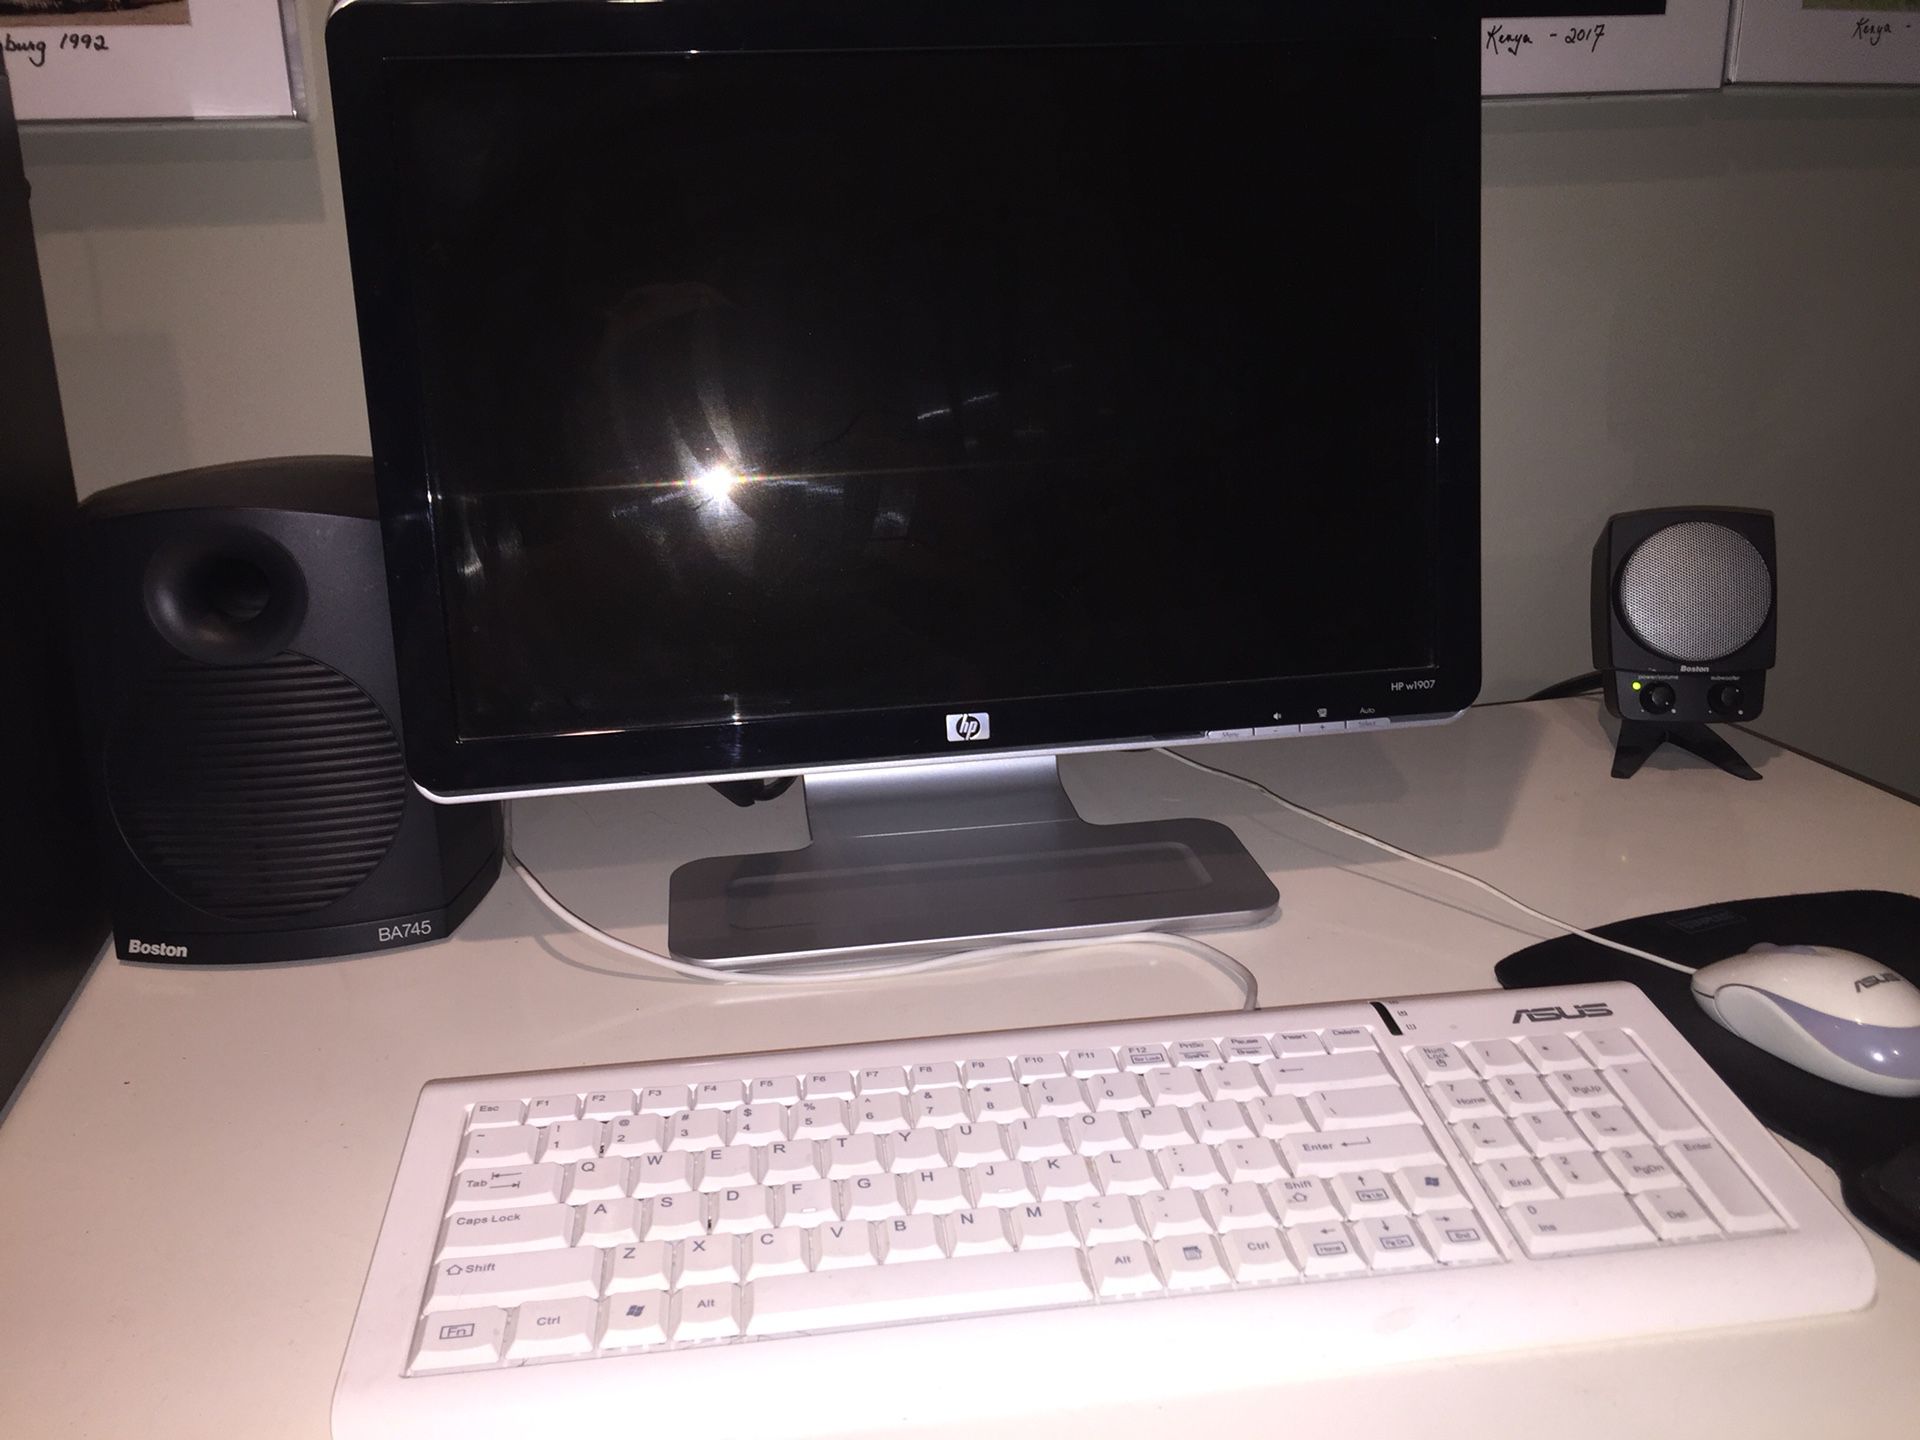 Personal Computer with printer, keyboard, mouse, and external speakers